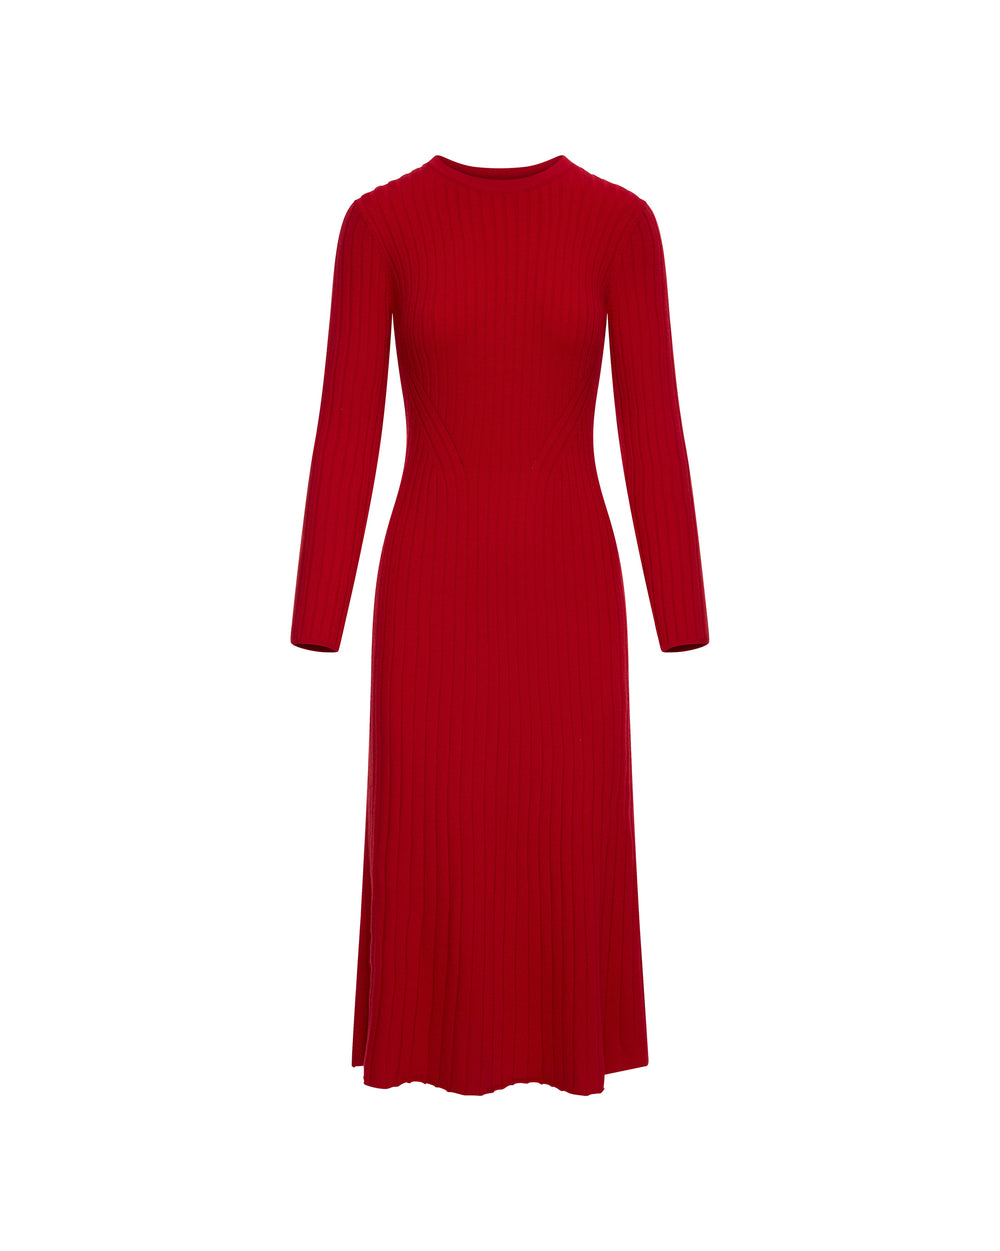 Ribbed Everyday Dress in Merino Wool | Red